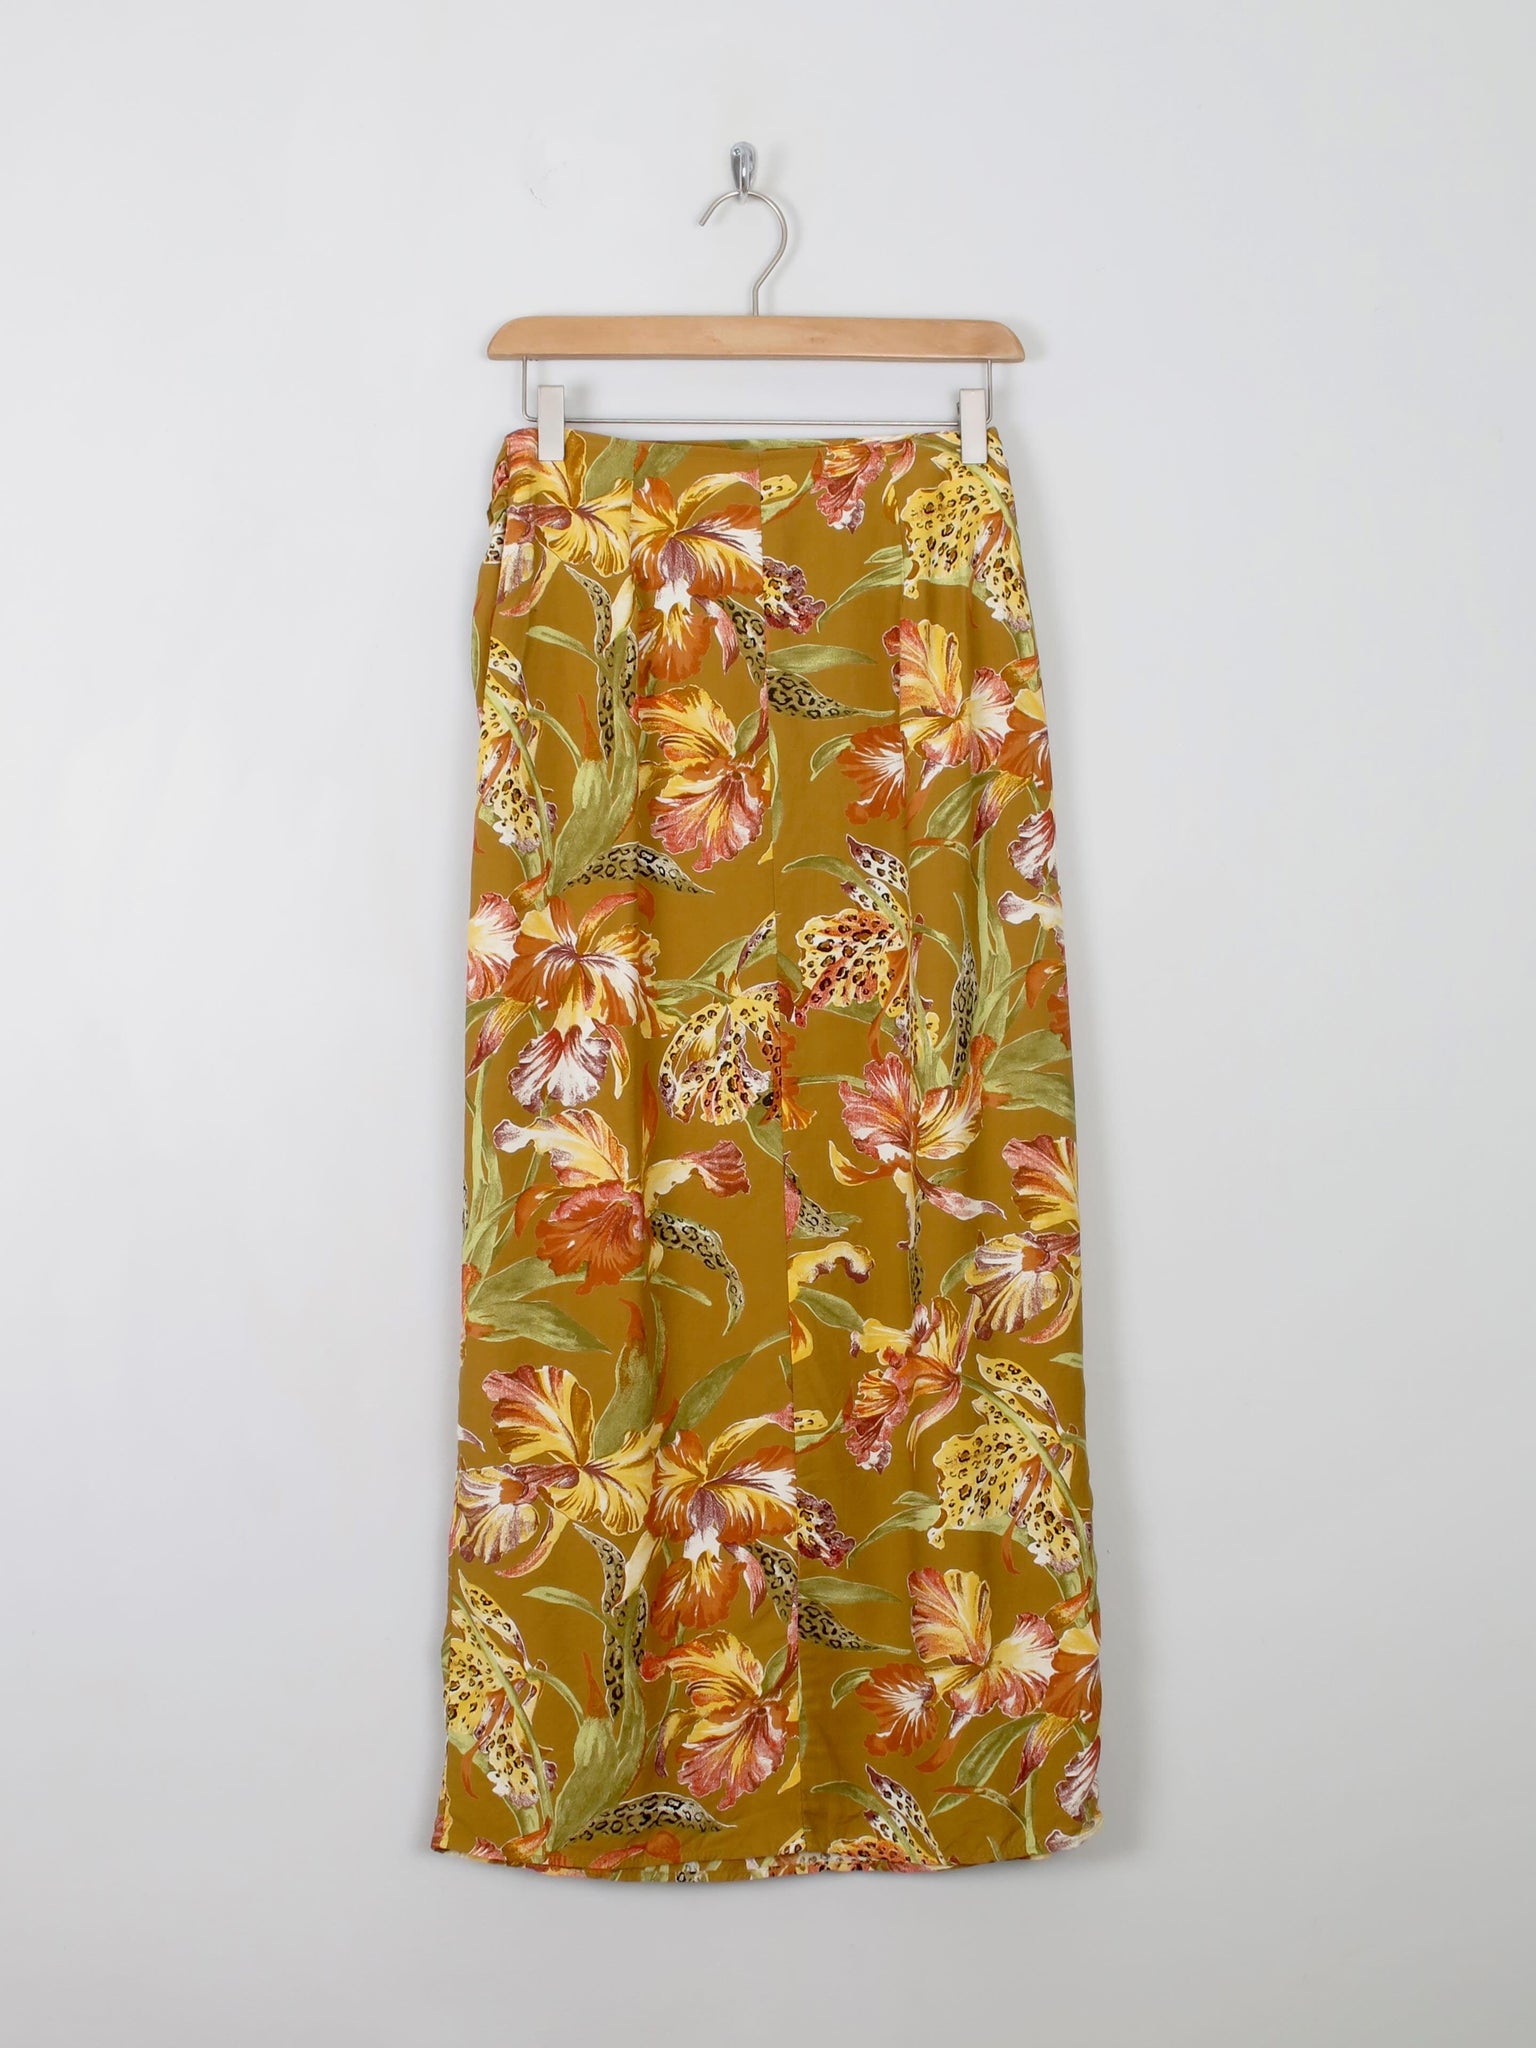 Printed Vintage Wrap Over Style Skirt 26" 6/8 XS - The Harlequin